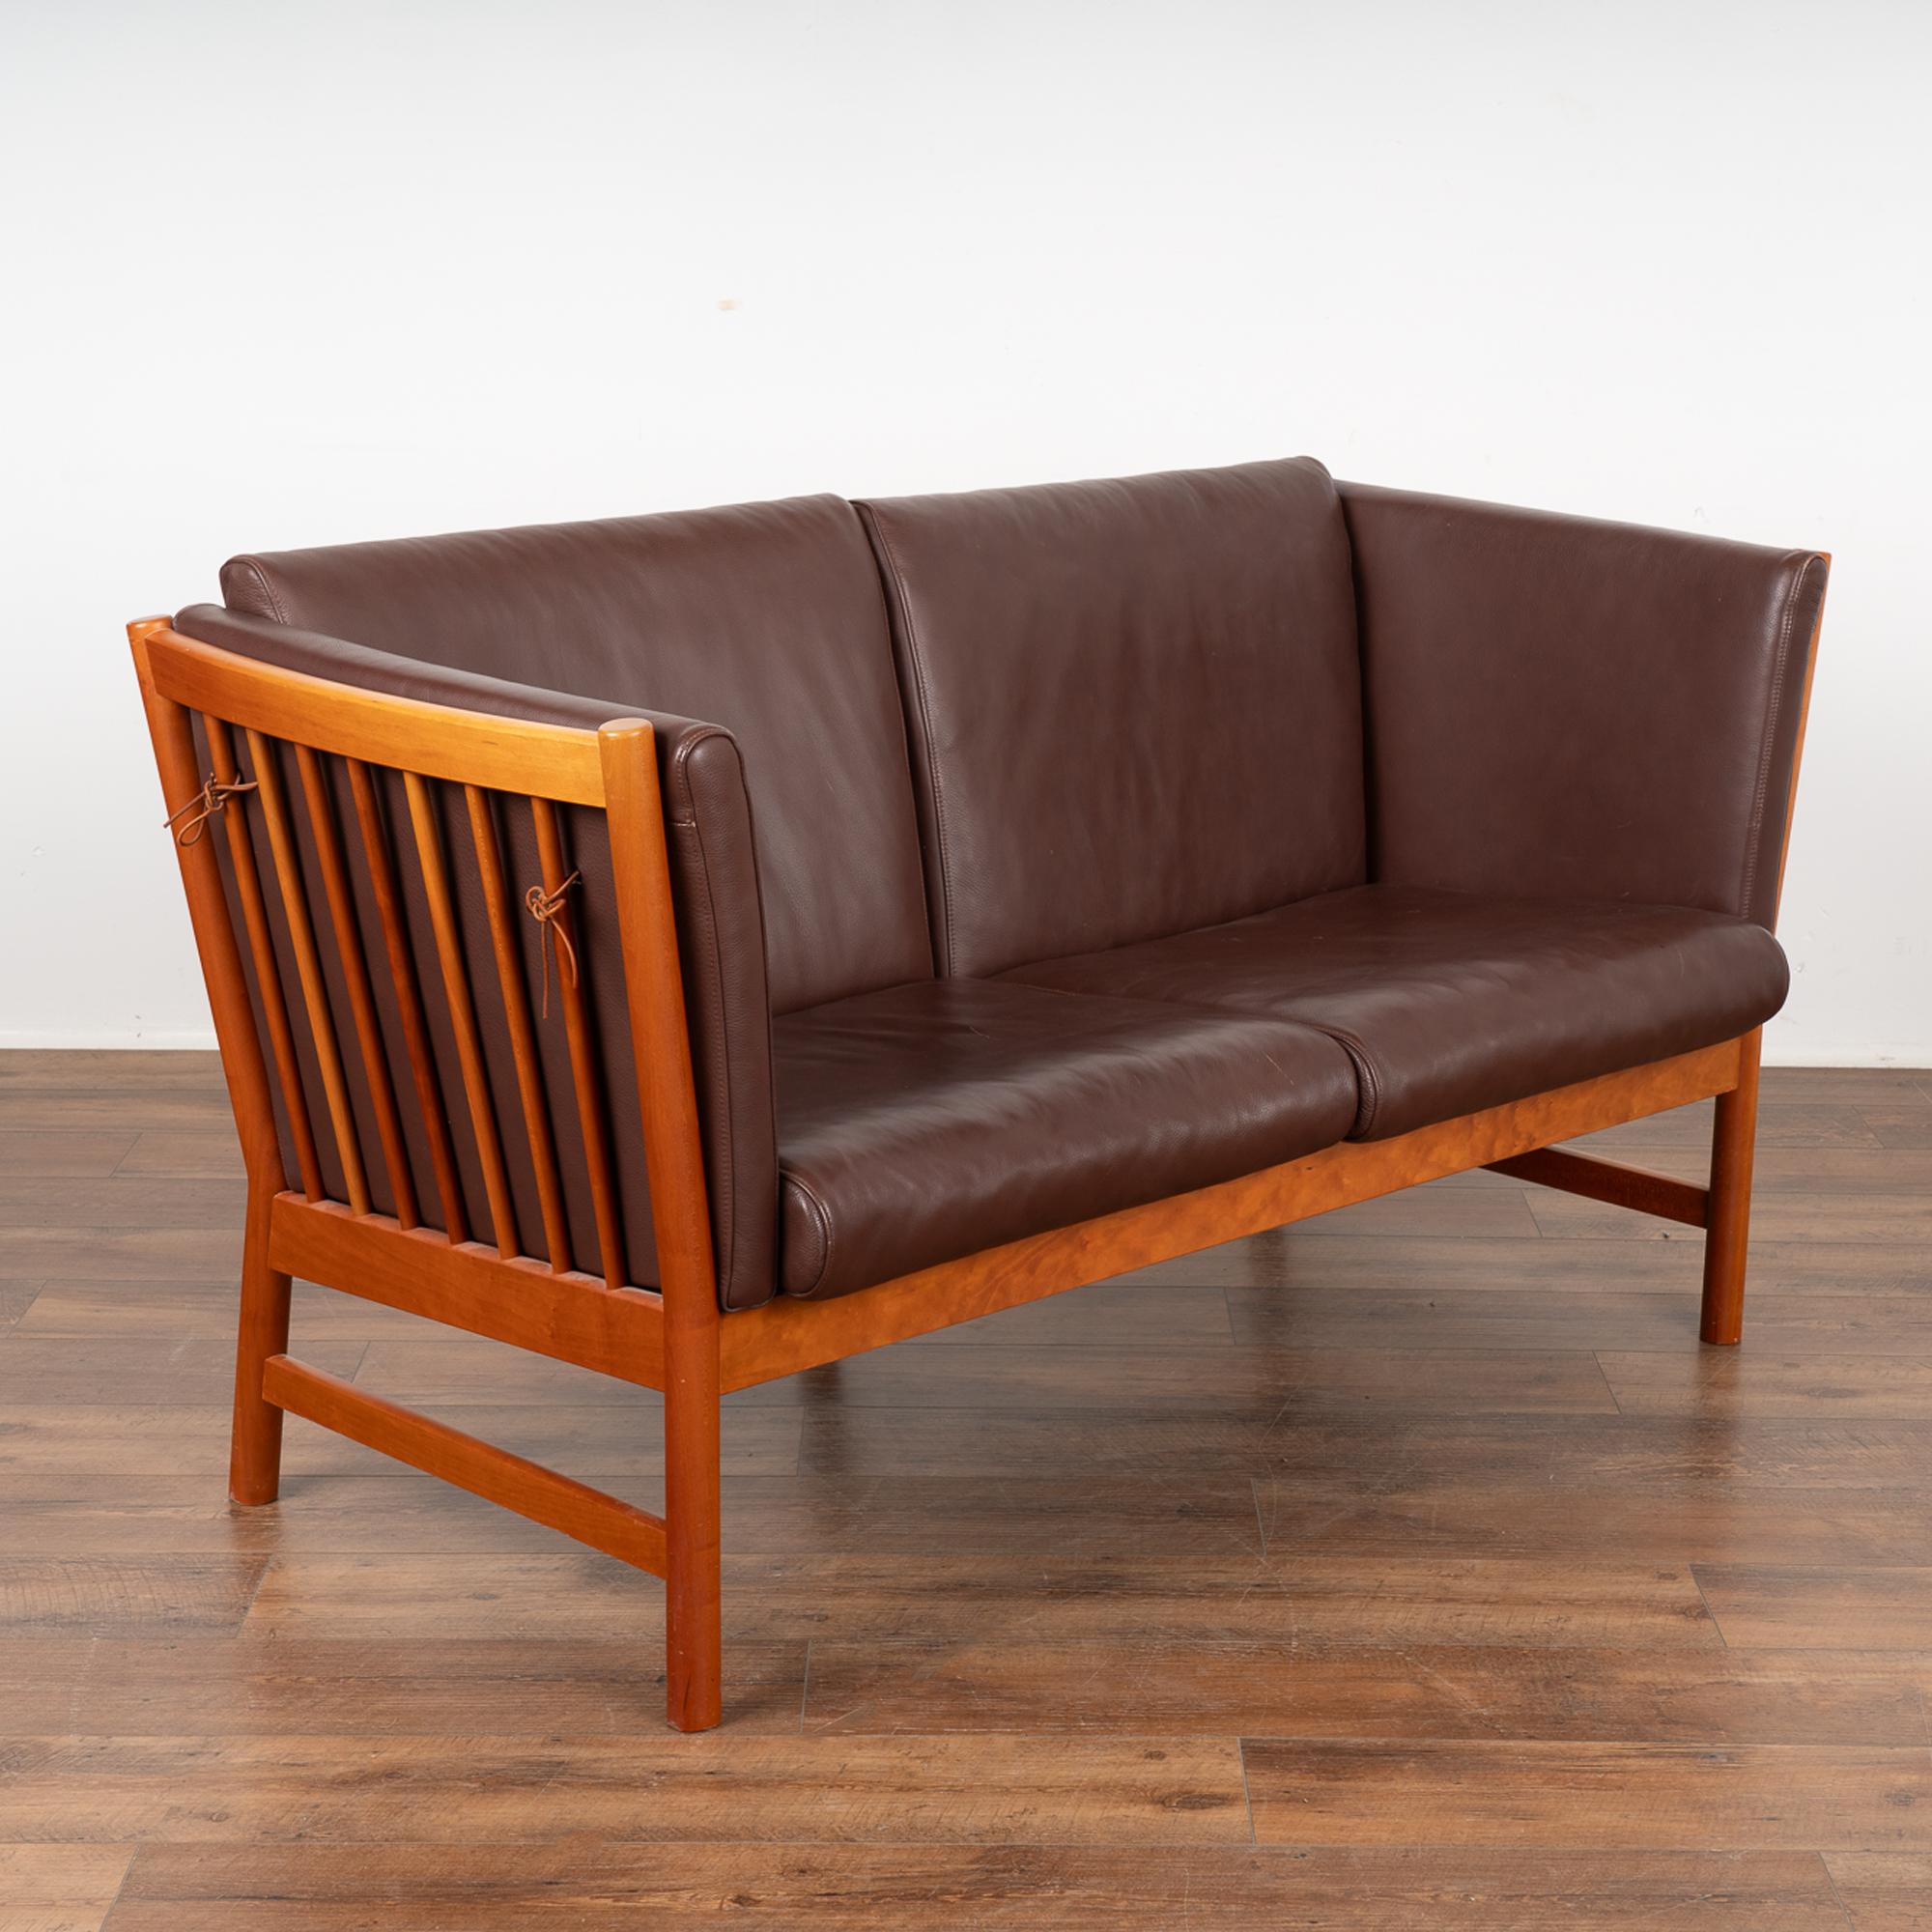 Mid-century modern vintage two seat leather sofa loveseat with spindle sides and back.
This comfortable sofa combining tradition with modern lines; upholstered in burgundy colored leather, loose cushions (side cushions tie to spindle), hardwood legs